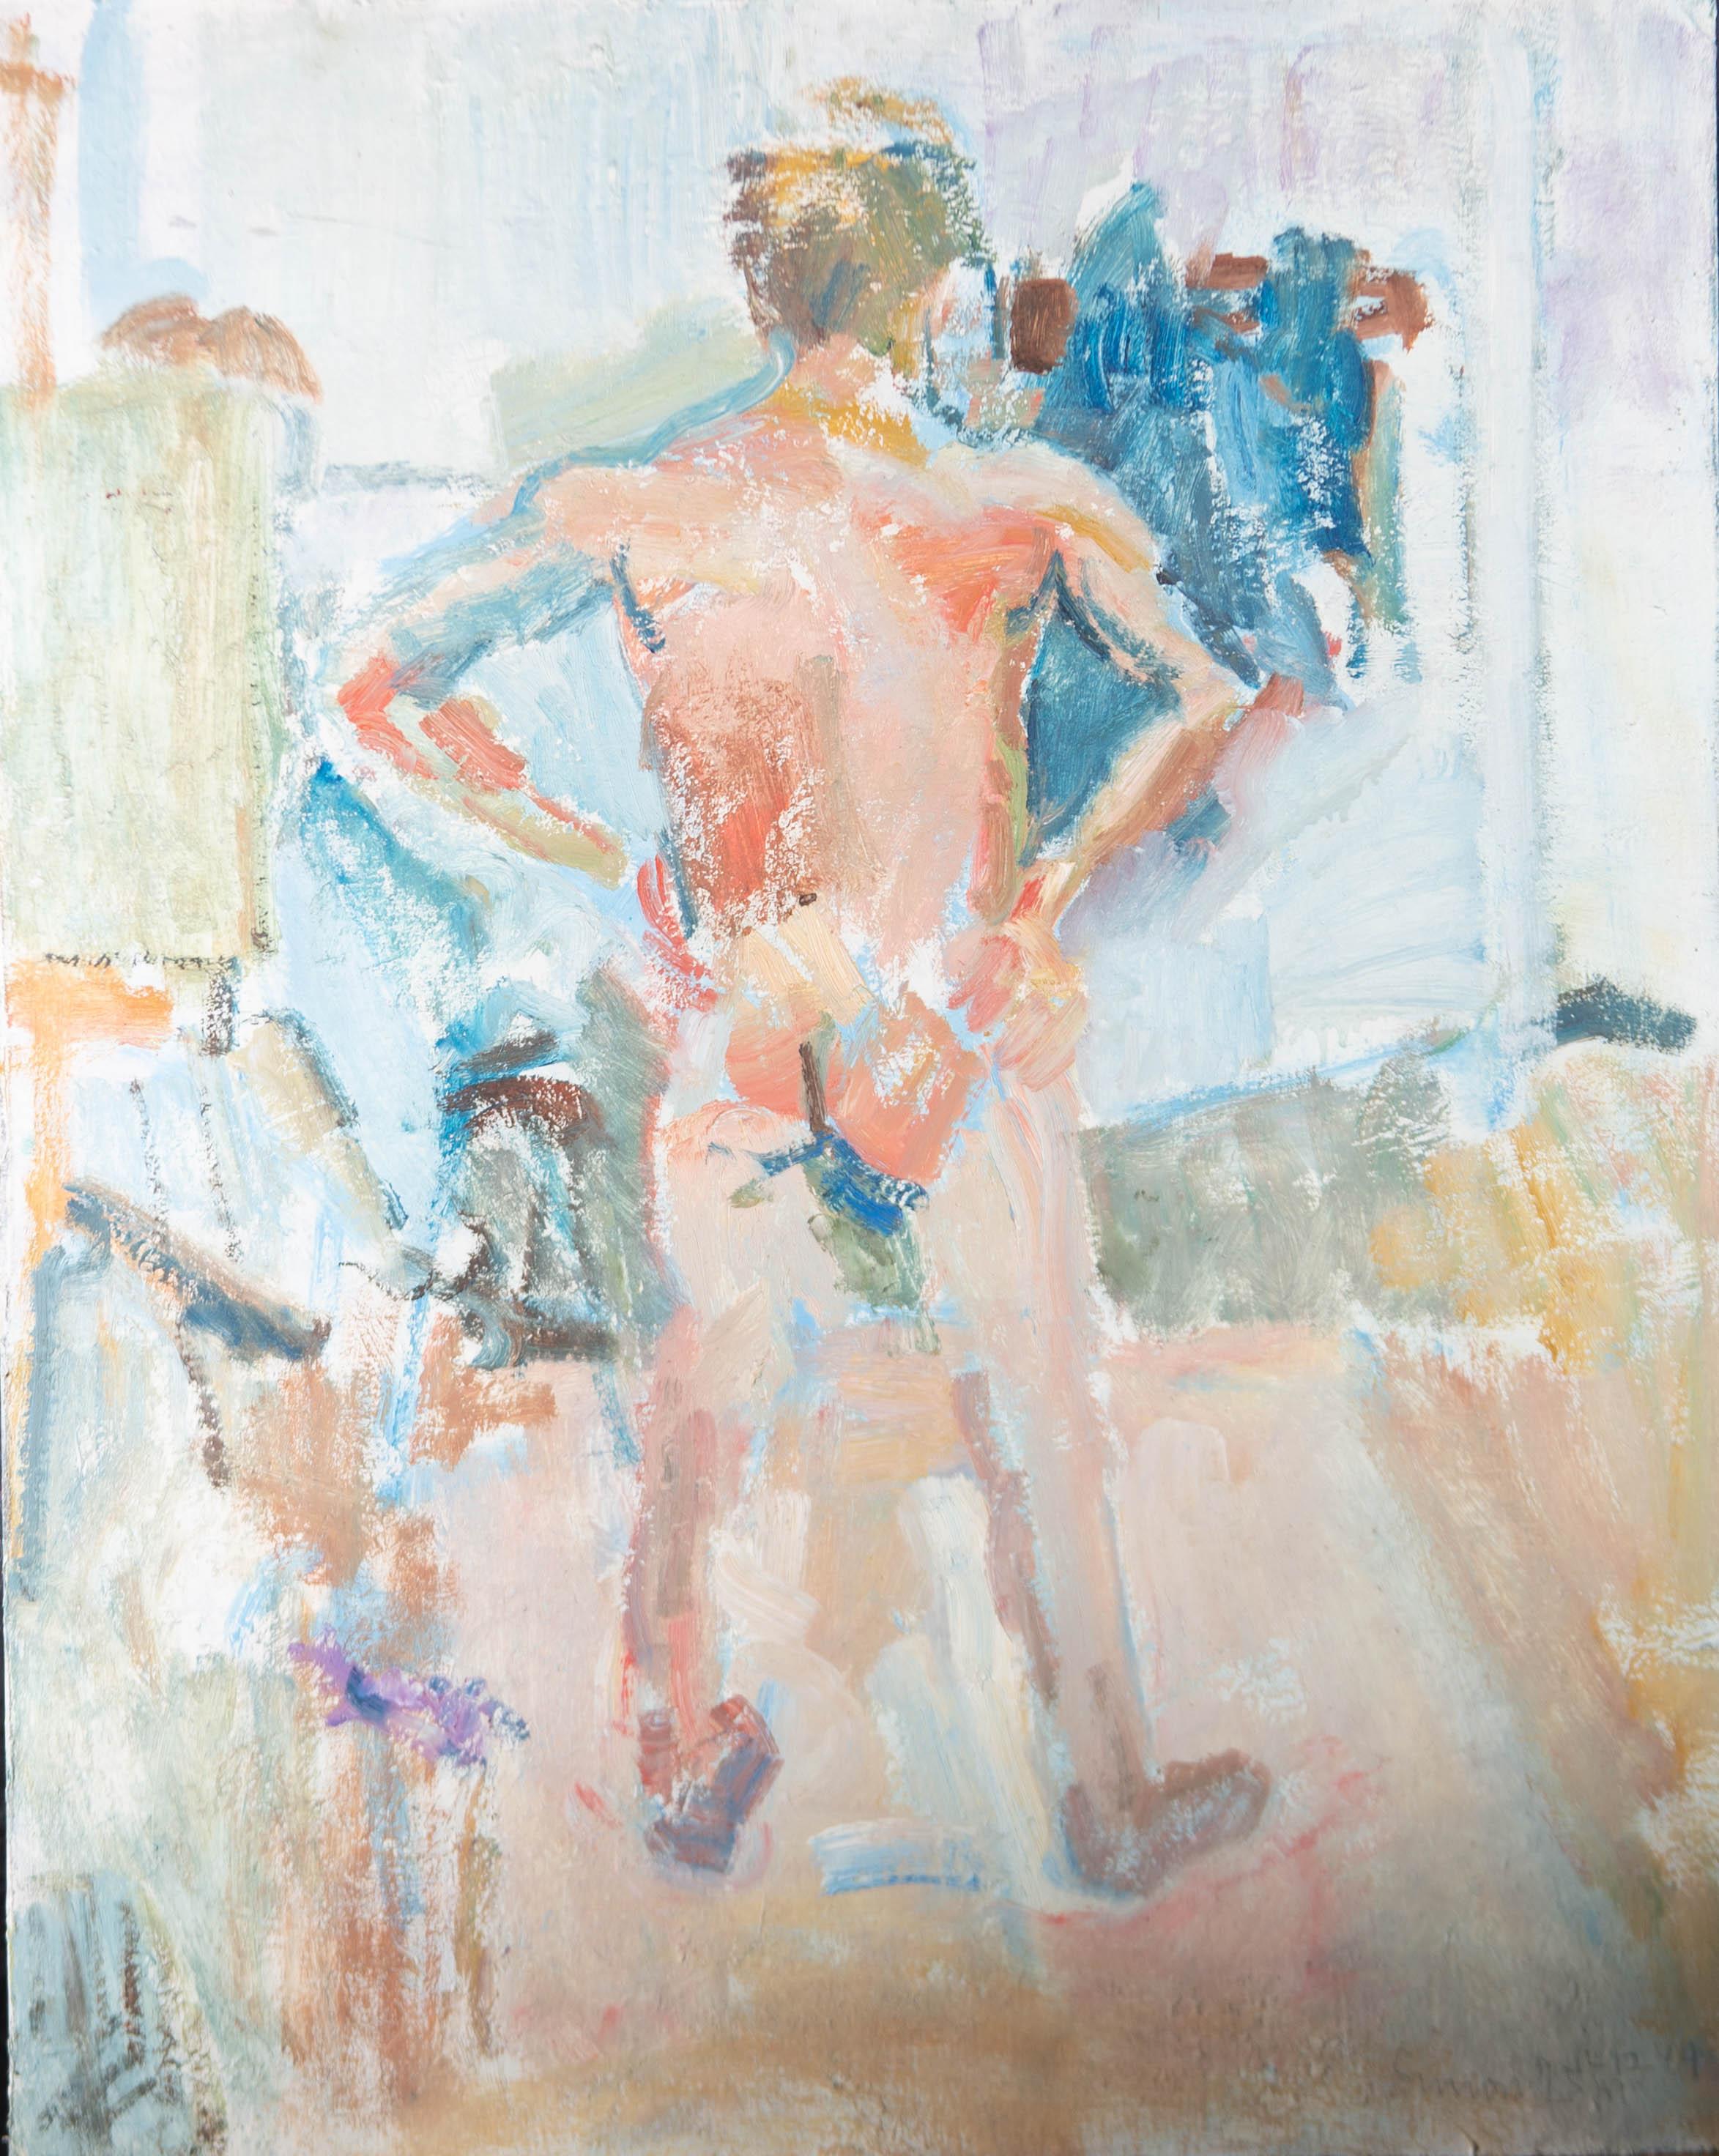 In this life study, paint has been applied in a fast, expressive manner to render a lively and expressive study of a nude. The artwork radiates energy in an honest and undiluted manner as Lewis captures the moment with vigor and passion. The artwork